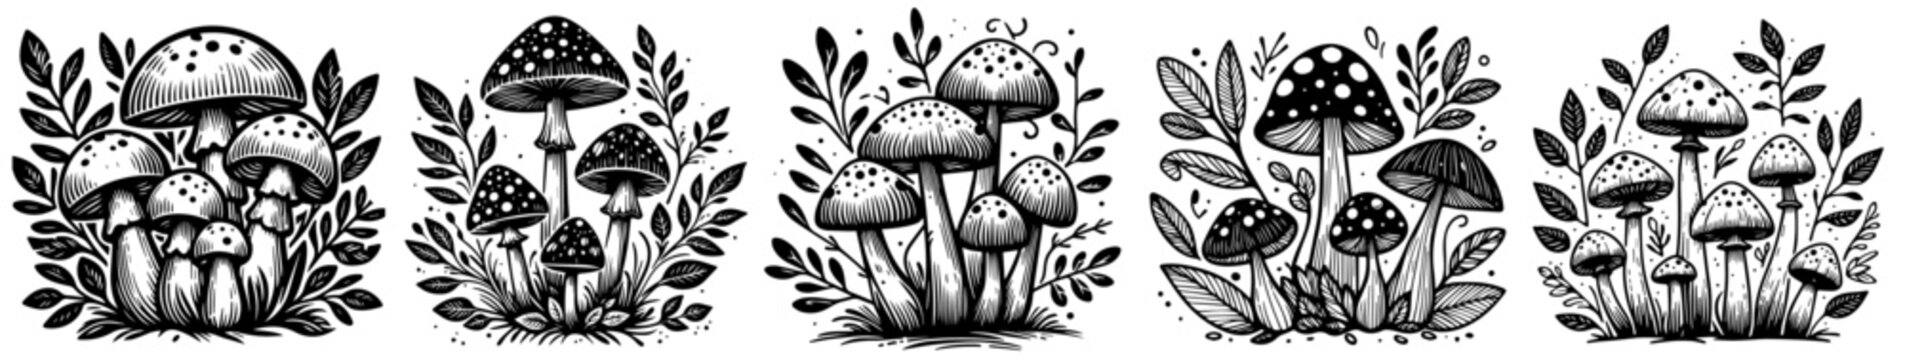 magical mushrooms in forest with leaves mushroom collection black vector